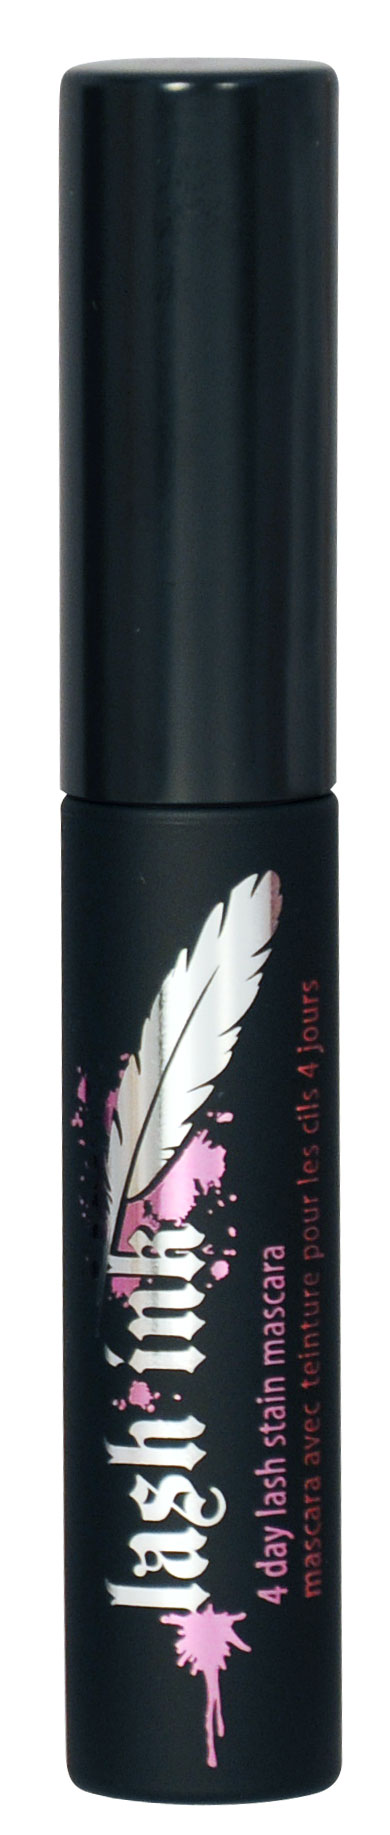 Hard Candy Lash Ink 4 Day Lash Stain